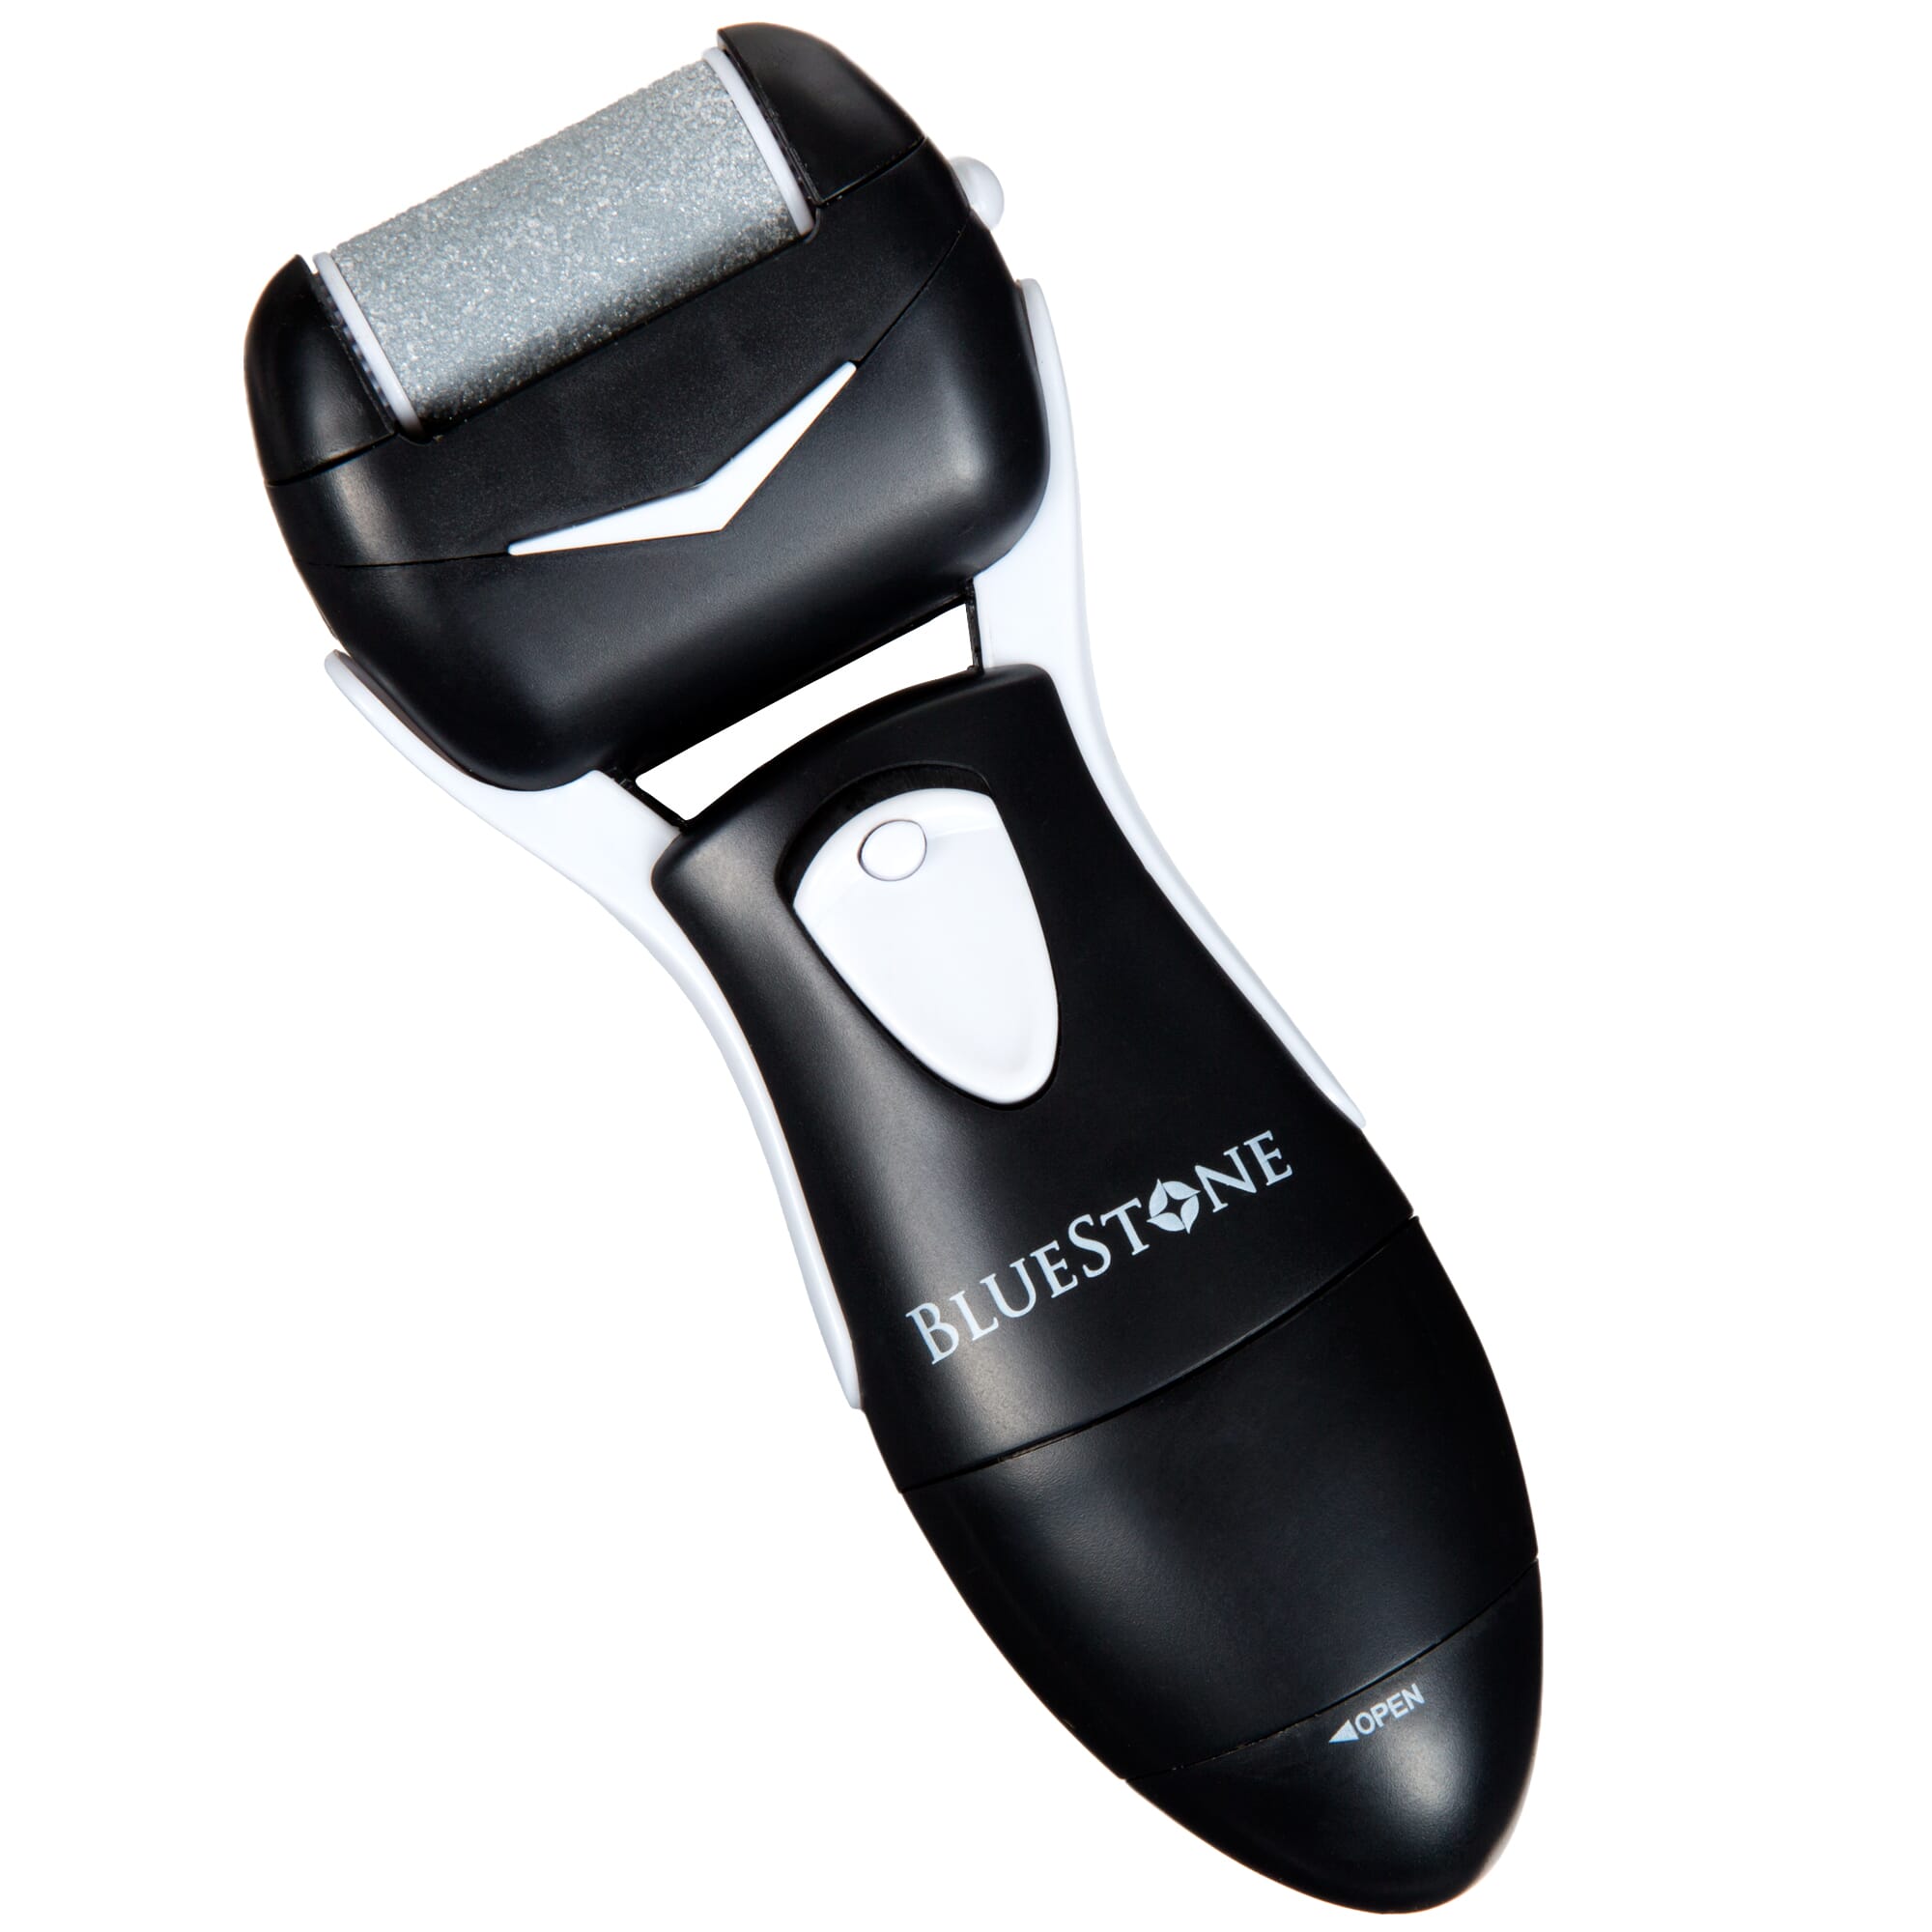 Bluestone Men's Foot Callus Remover with Two Rollers - Free Shipping